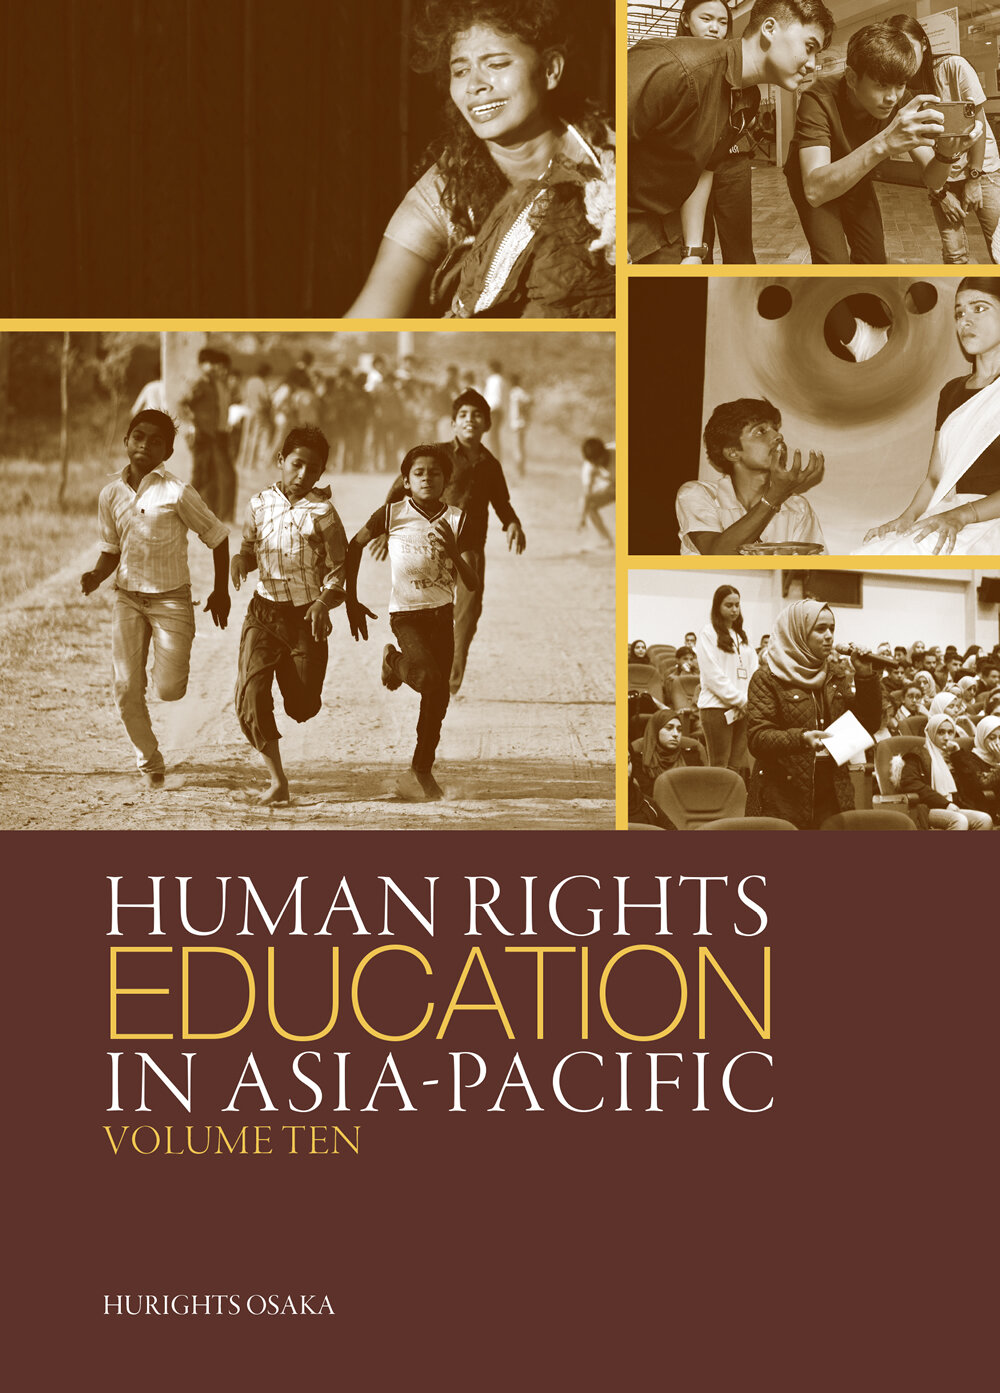 https://www.hurights.or.jp/archives/asia-pacific/section1/hreap_v10_cover.jpg